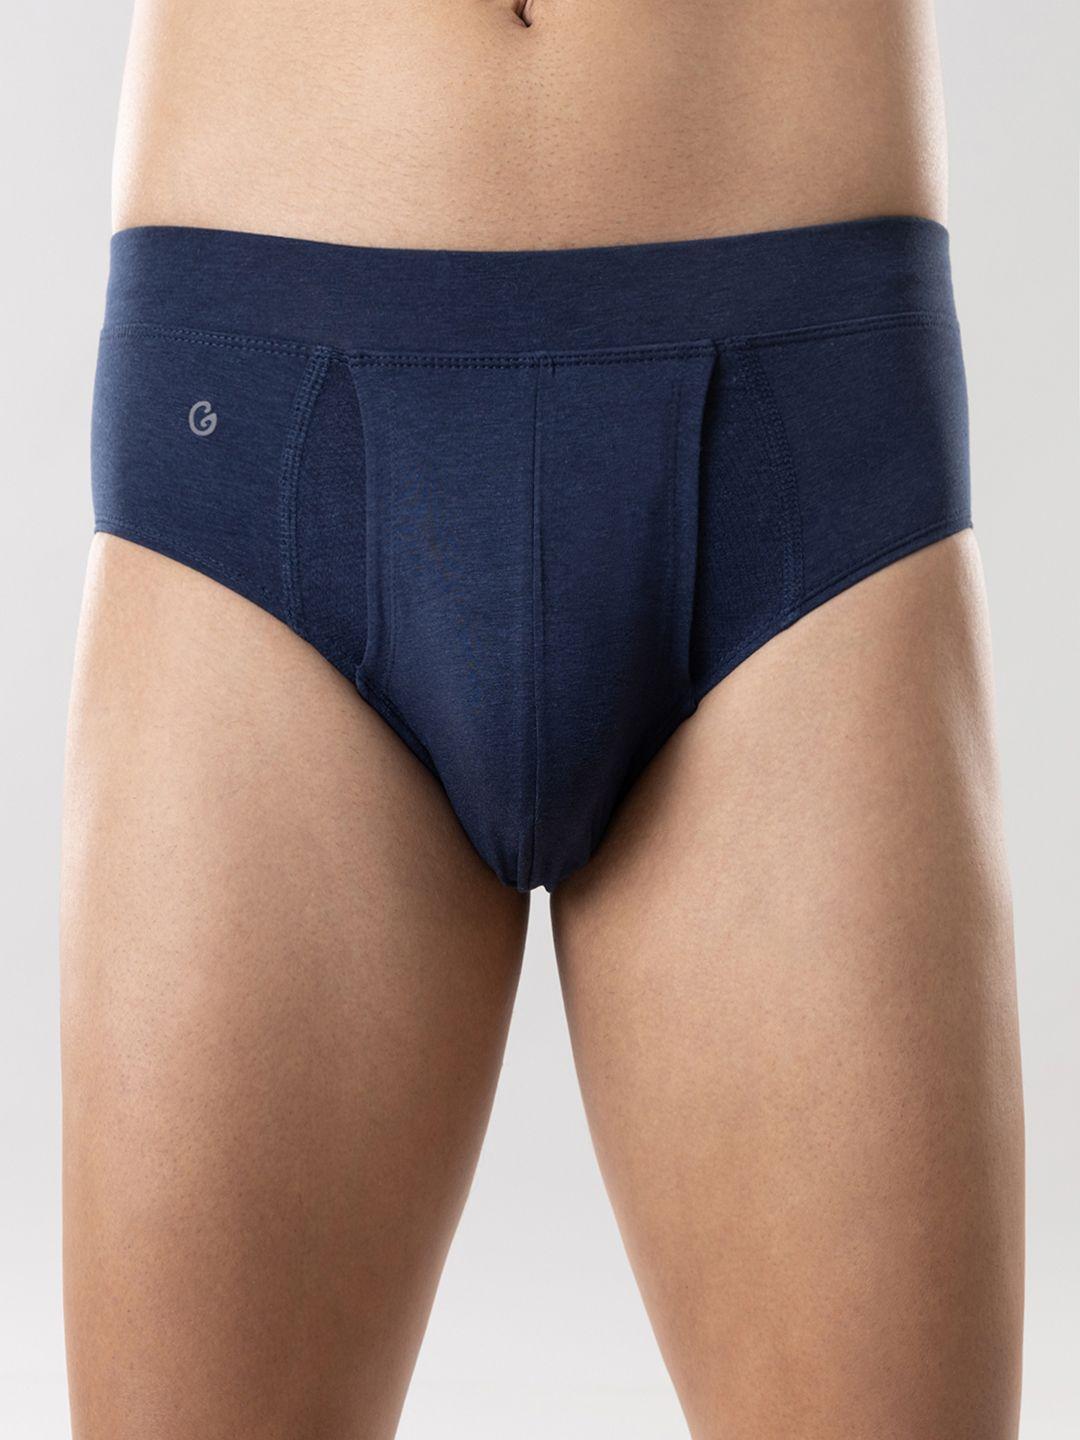 gloot men blue cotton brief with anti odor & cool mesh zones